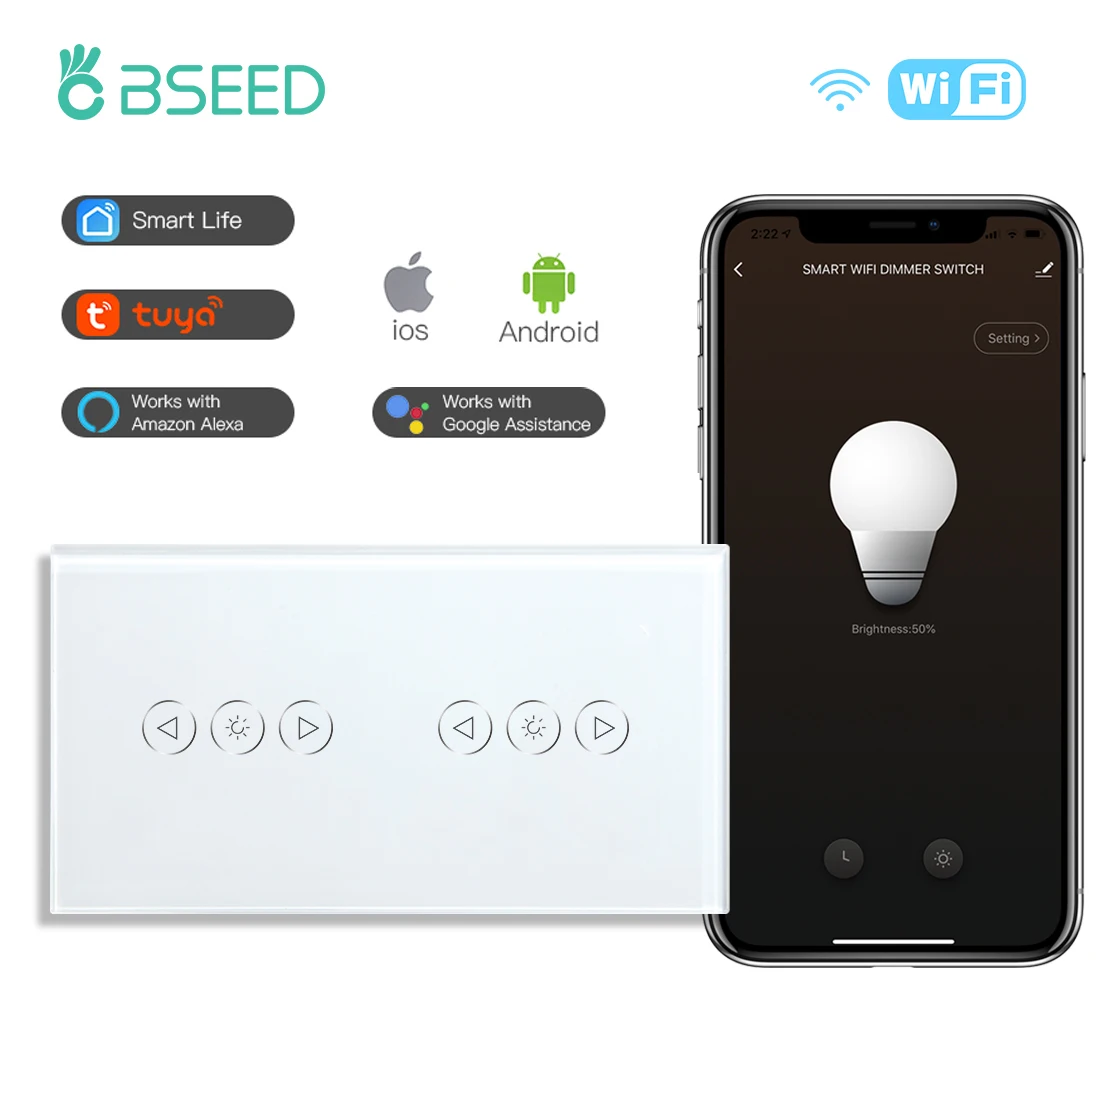 BSEED Wifi Dimmer Switch Double Led Dimmerable Smart Touch Dimmer Switch Work With Tuya Alexa Smart Life Tempered Crystal Glass